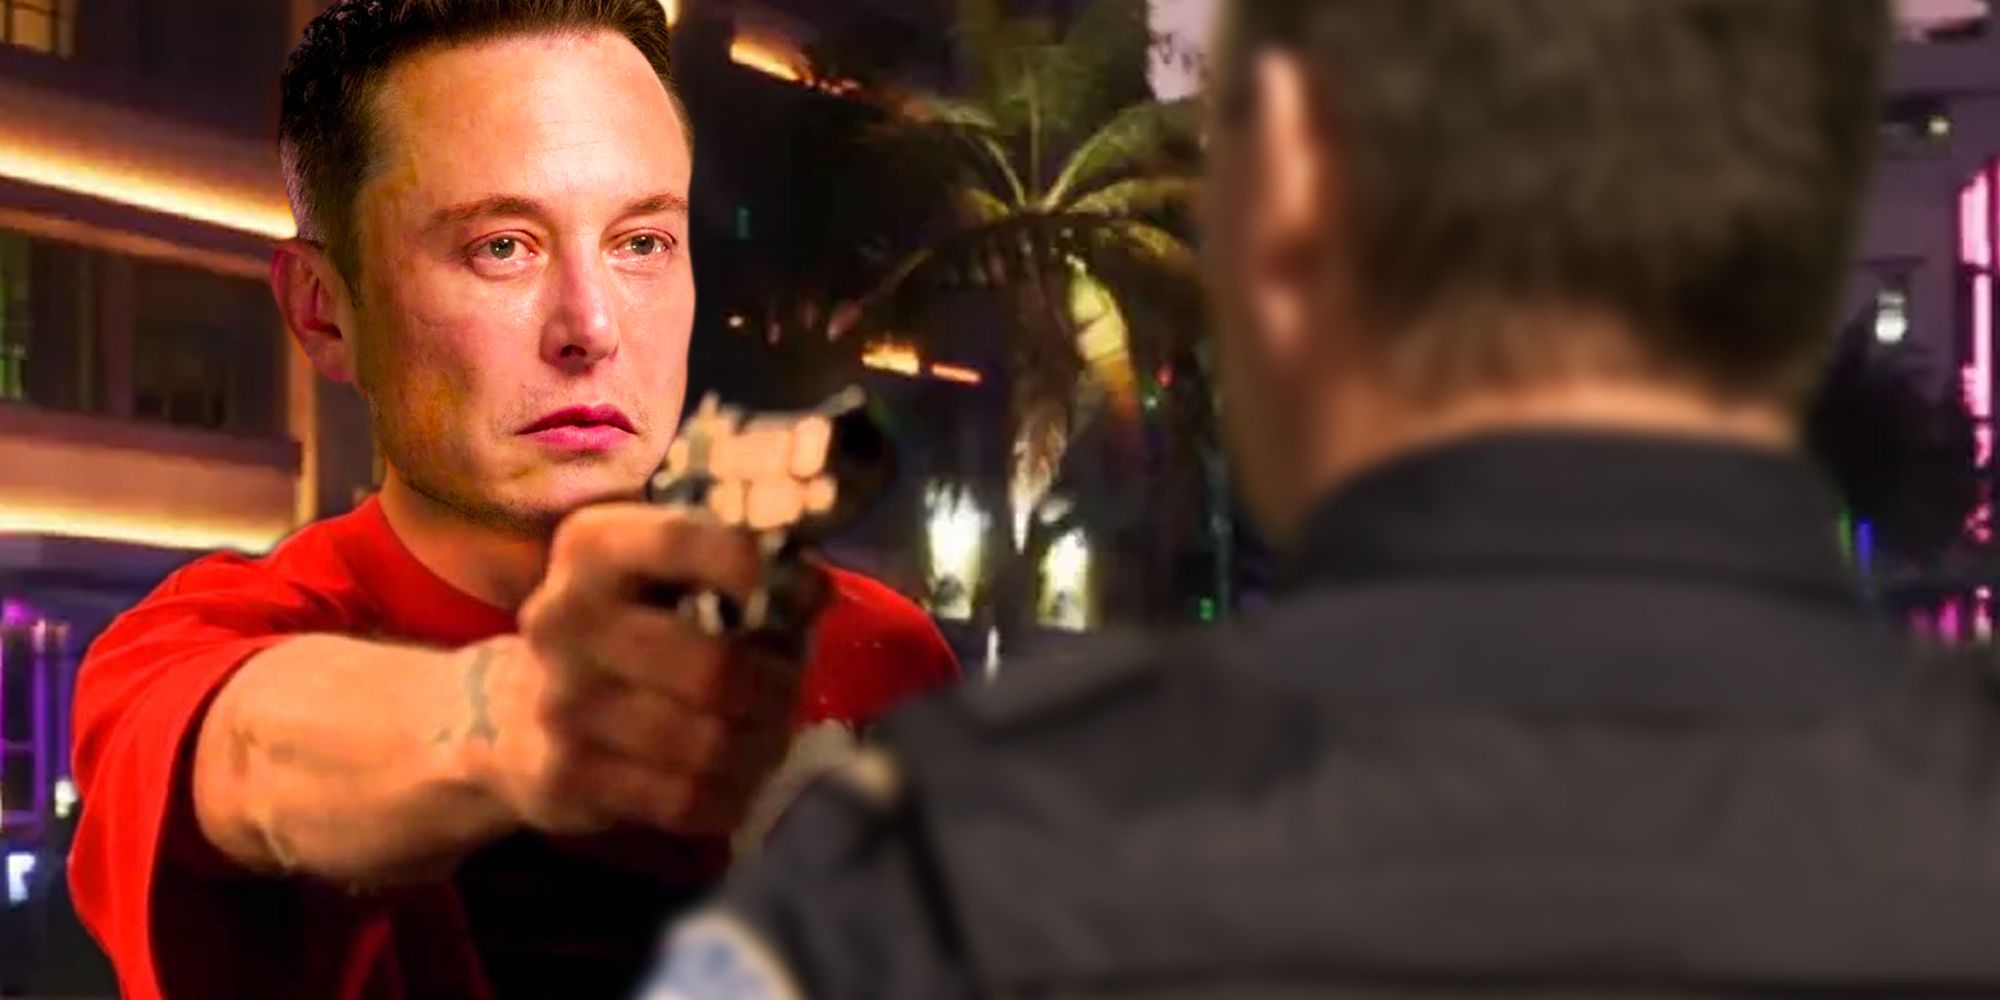 Elon Musk's head on Jesse Pinkman's body pointing a gun at a cop